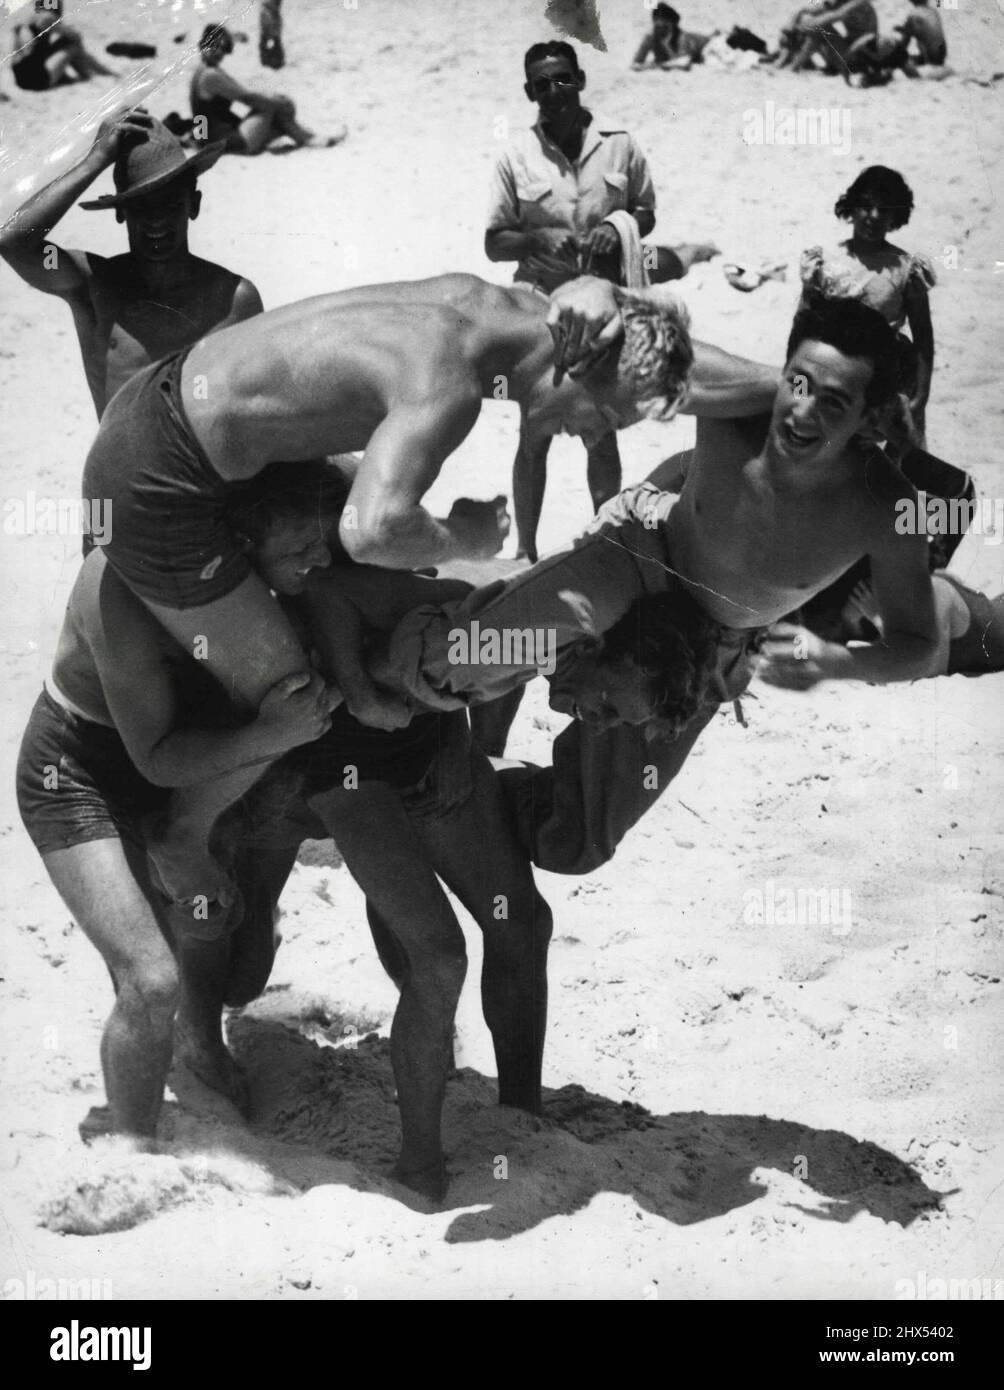 Horseplay. North Bondi Surf Club members show the kind of horseplay they detest. The actors include. Colin Guthrie, Kevin McGuire, Ron. Lennon, Tom Edwards and Frank Taylor. December 26, 1948. Stock Photo